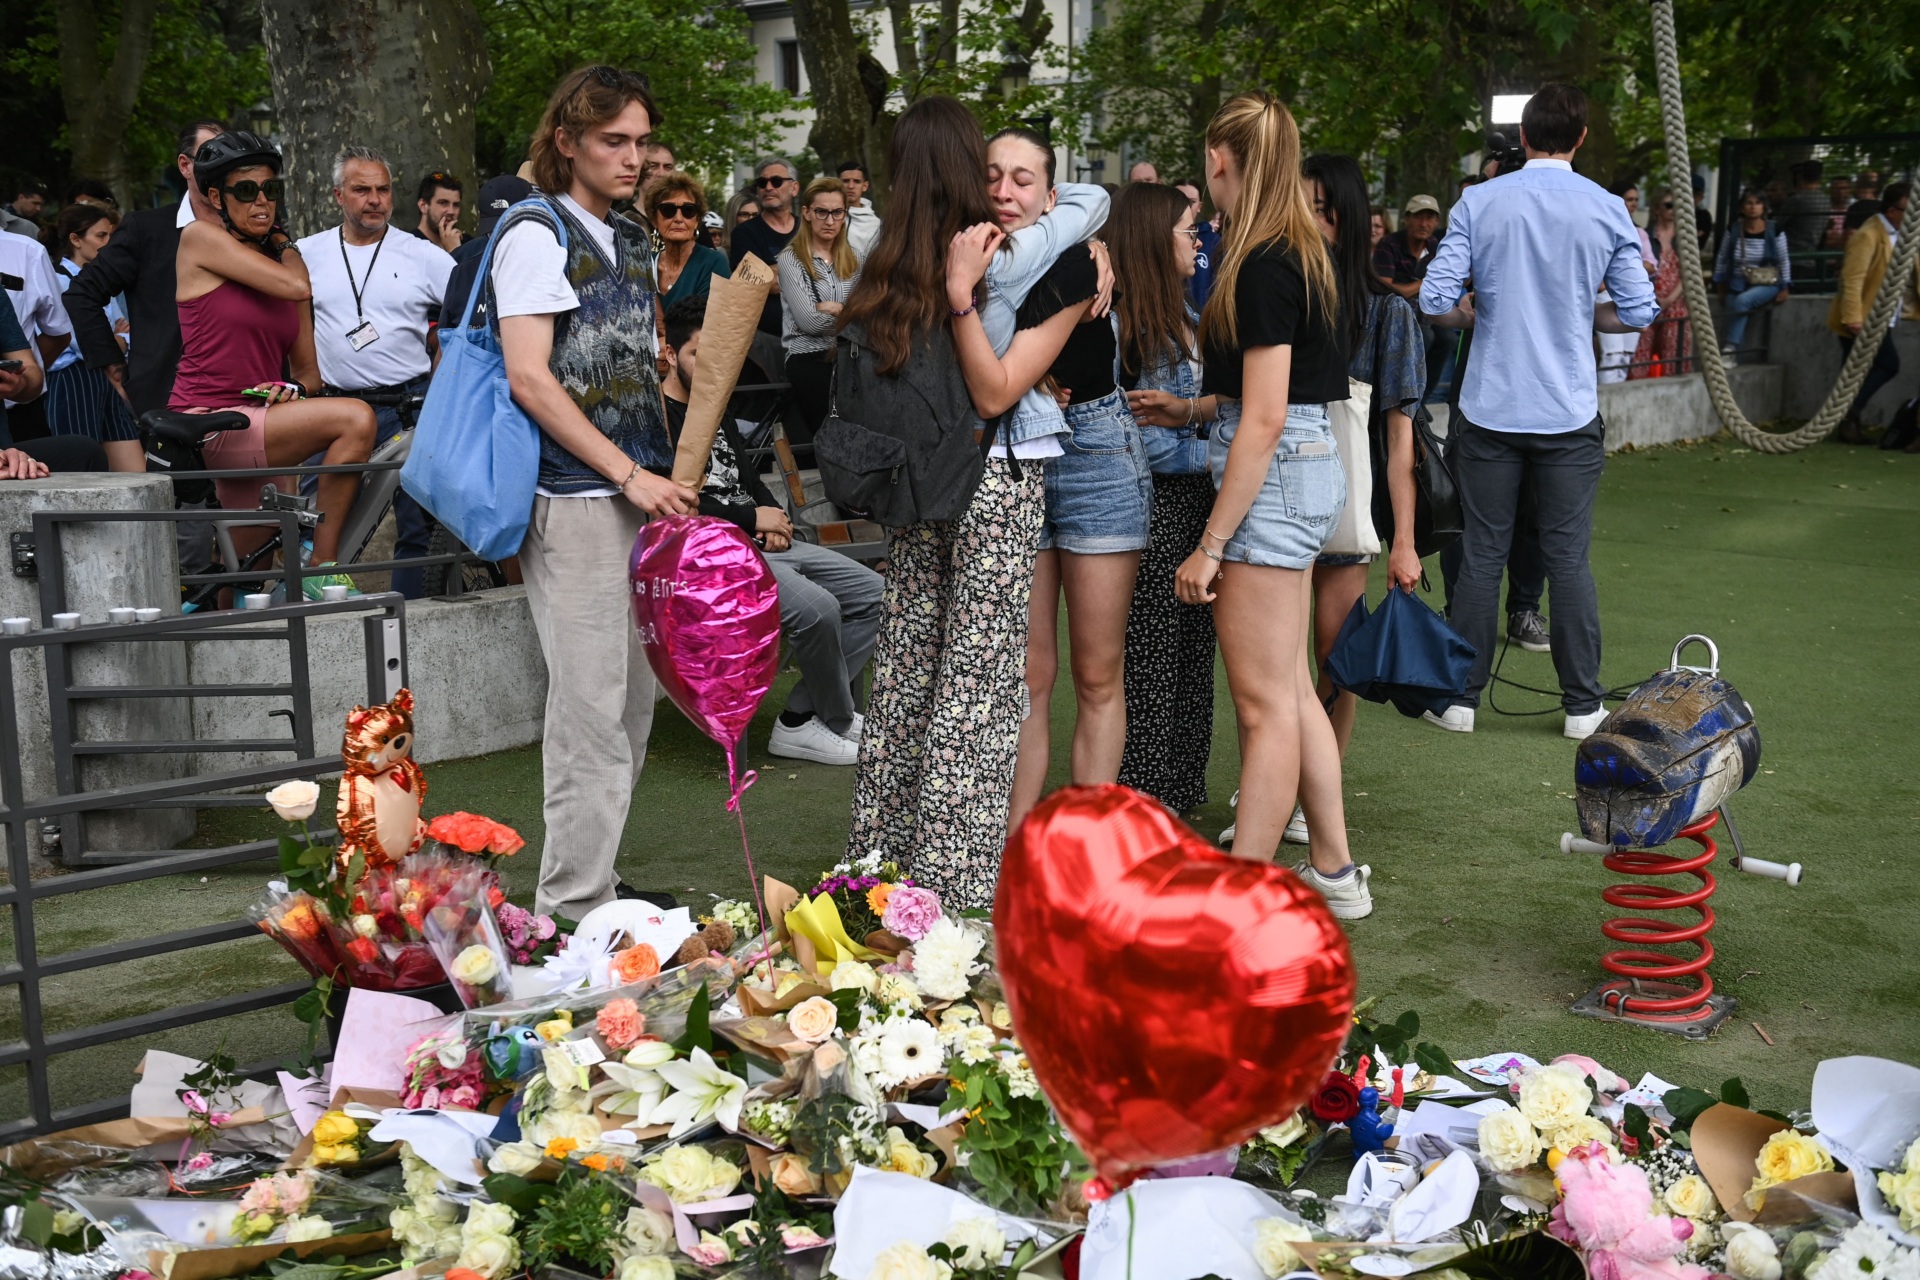 People hug in front of flowers and candles for the victims of a stabbing attack that occured the day before in the 'Jardins de l'Europe' parc in Annecy, French Alps, on June 9, 2023. A man armed with a knife stabbed four preschool children and injured two adults by a lake in the French Alps on June 8 in an attack that sent shock waves through the country. The suspect is a Syrian in his early 30s who was granted refugee status in Sweden in April, a police source told AFP. He was arrested at the scene. (Photo by OLIVIER CHASSIGNOLE / AFP) (Photo by OLIVIER CHASSIGNOLE/AFP via Getty Images)